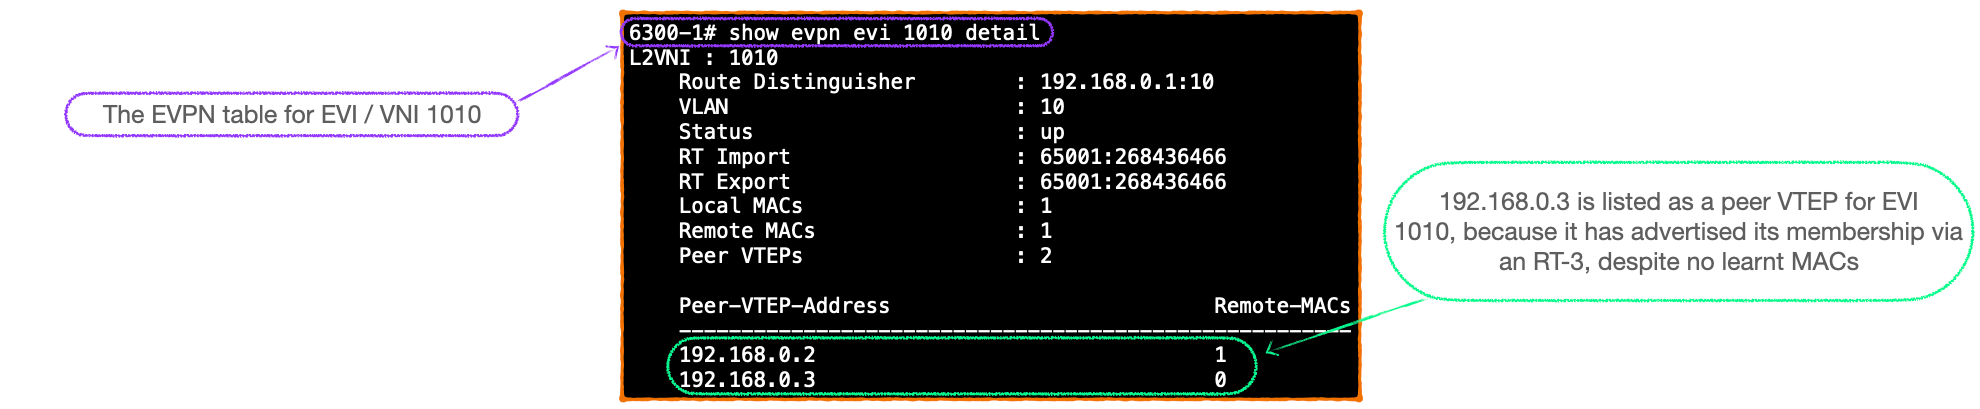 EVPN-VXLAN Explainer 4 - Route Type Three and Auto-Discovery